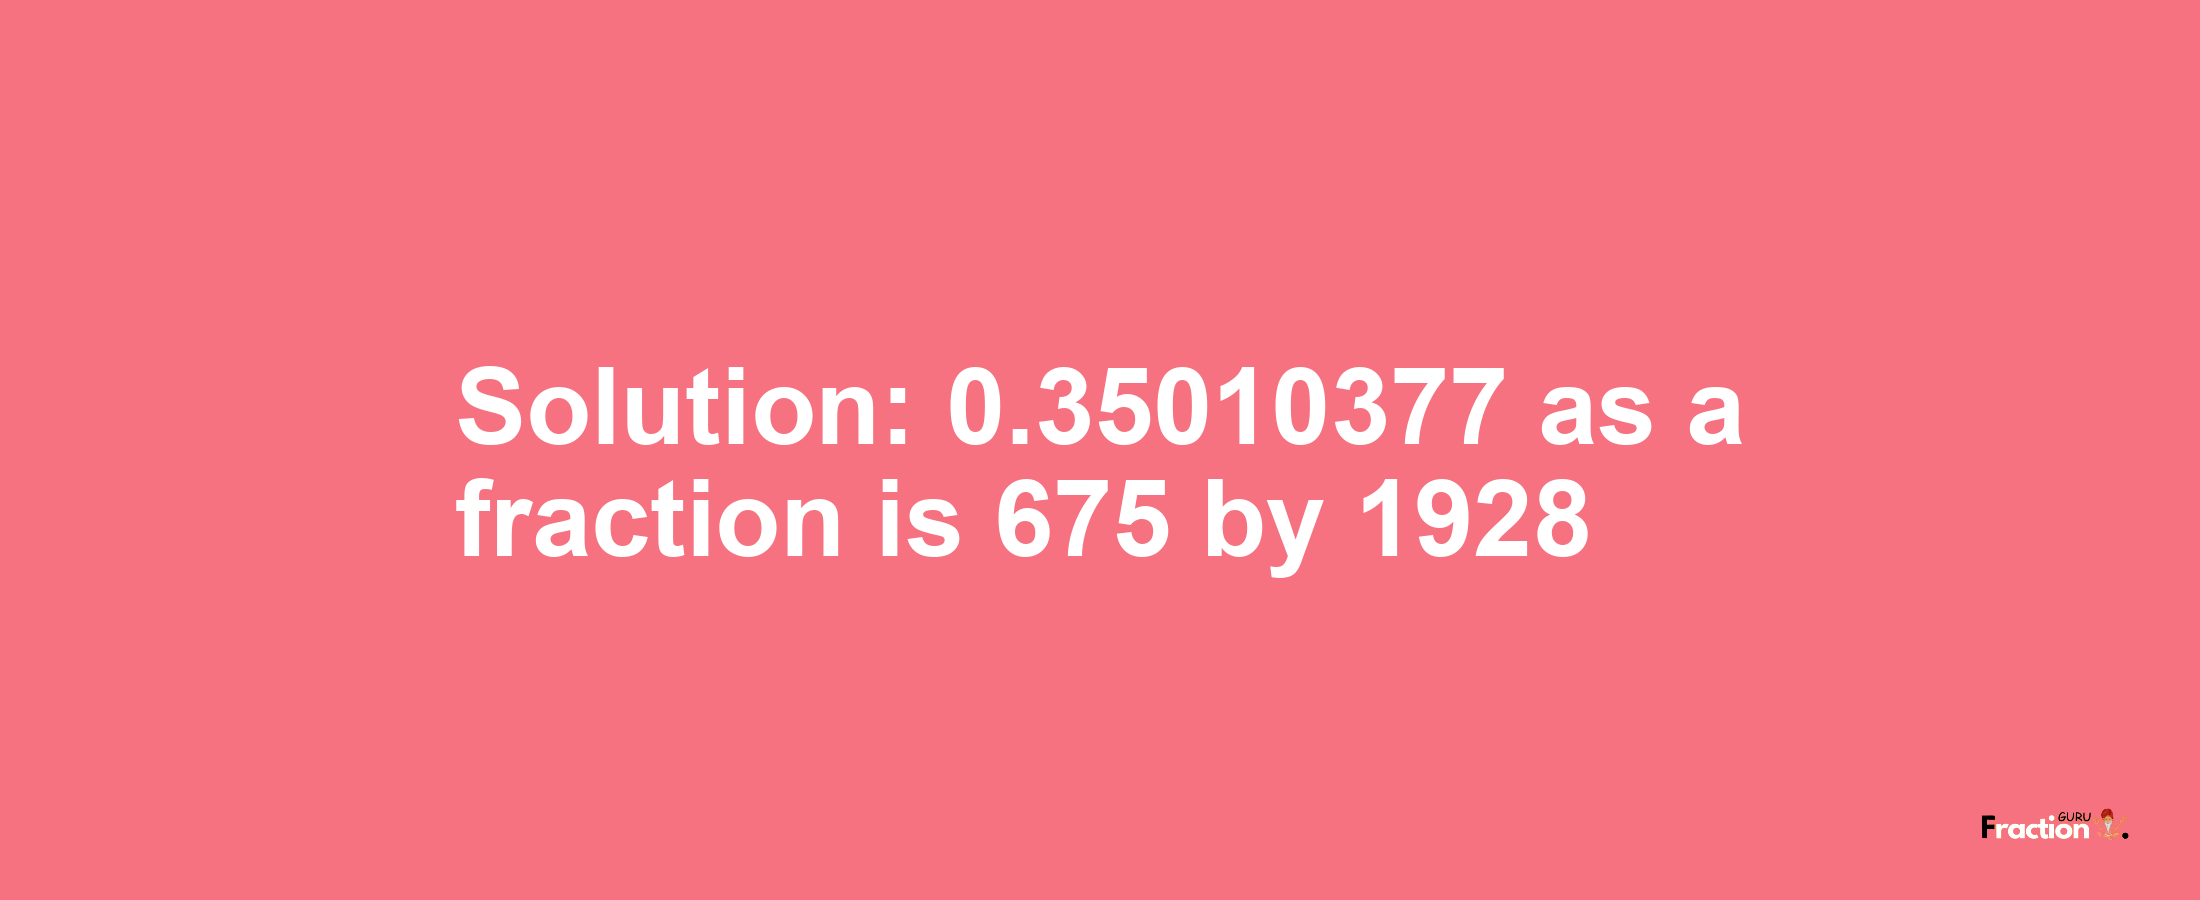 Solution:0.35010377 as a fraction is 675/1928